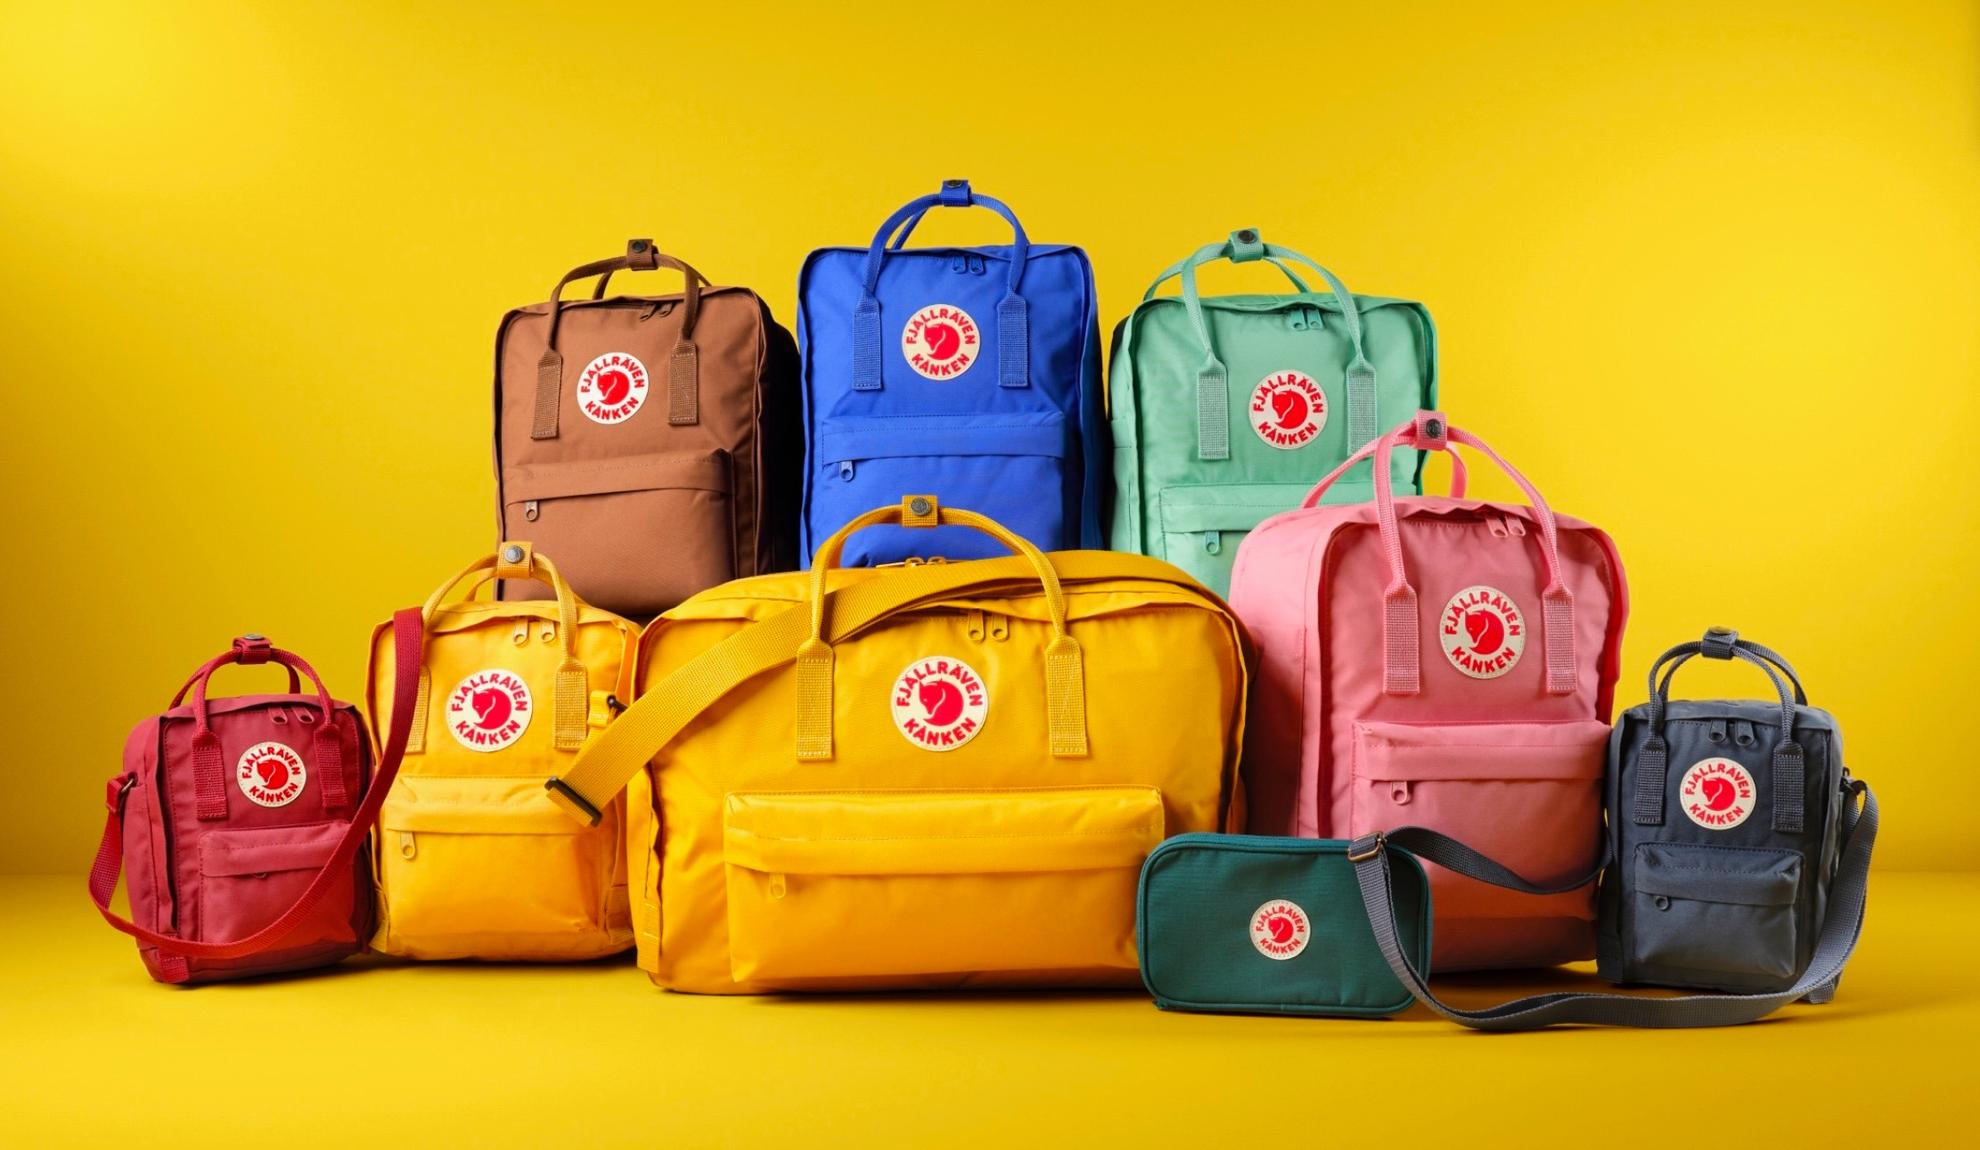 Several backpacks from Fjällräven on a yellow background.